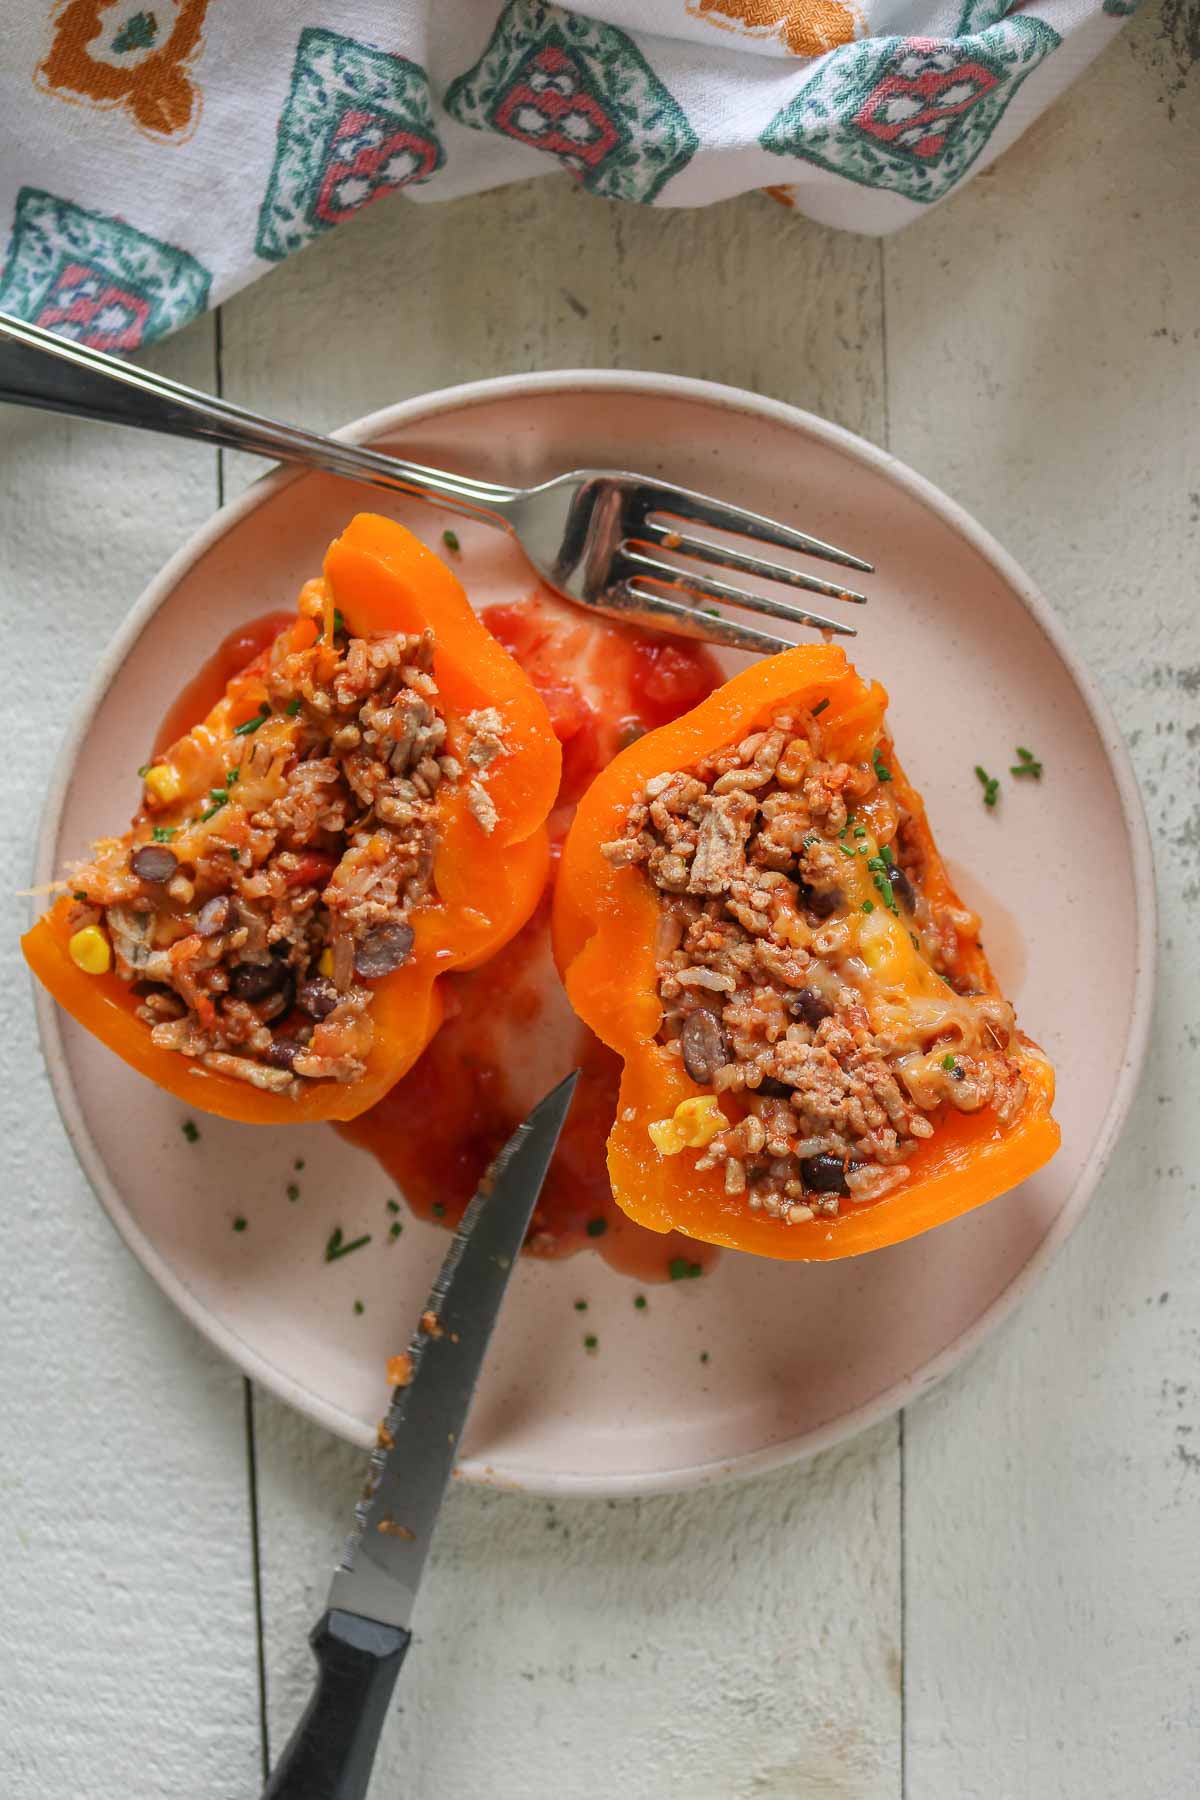 Two halves of a stuffed bell pepper on a plate with a fork and knife.